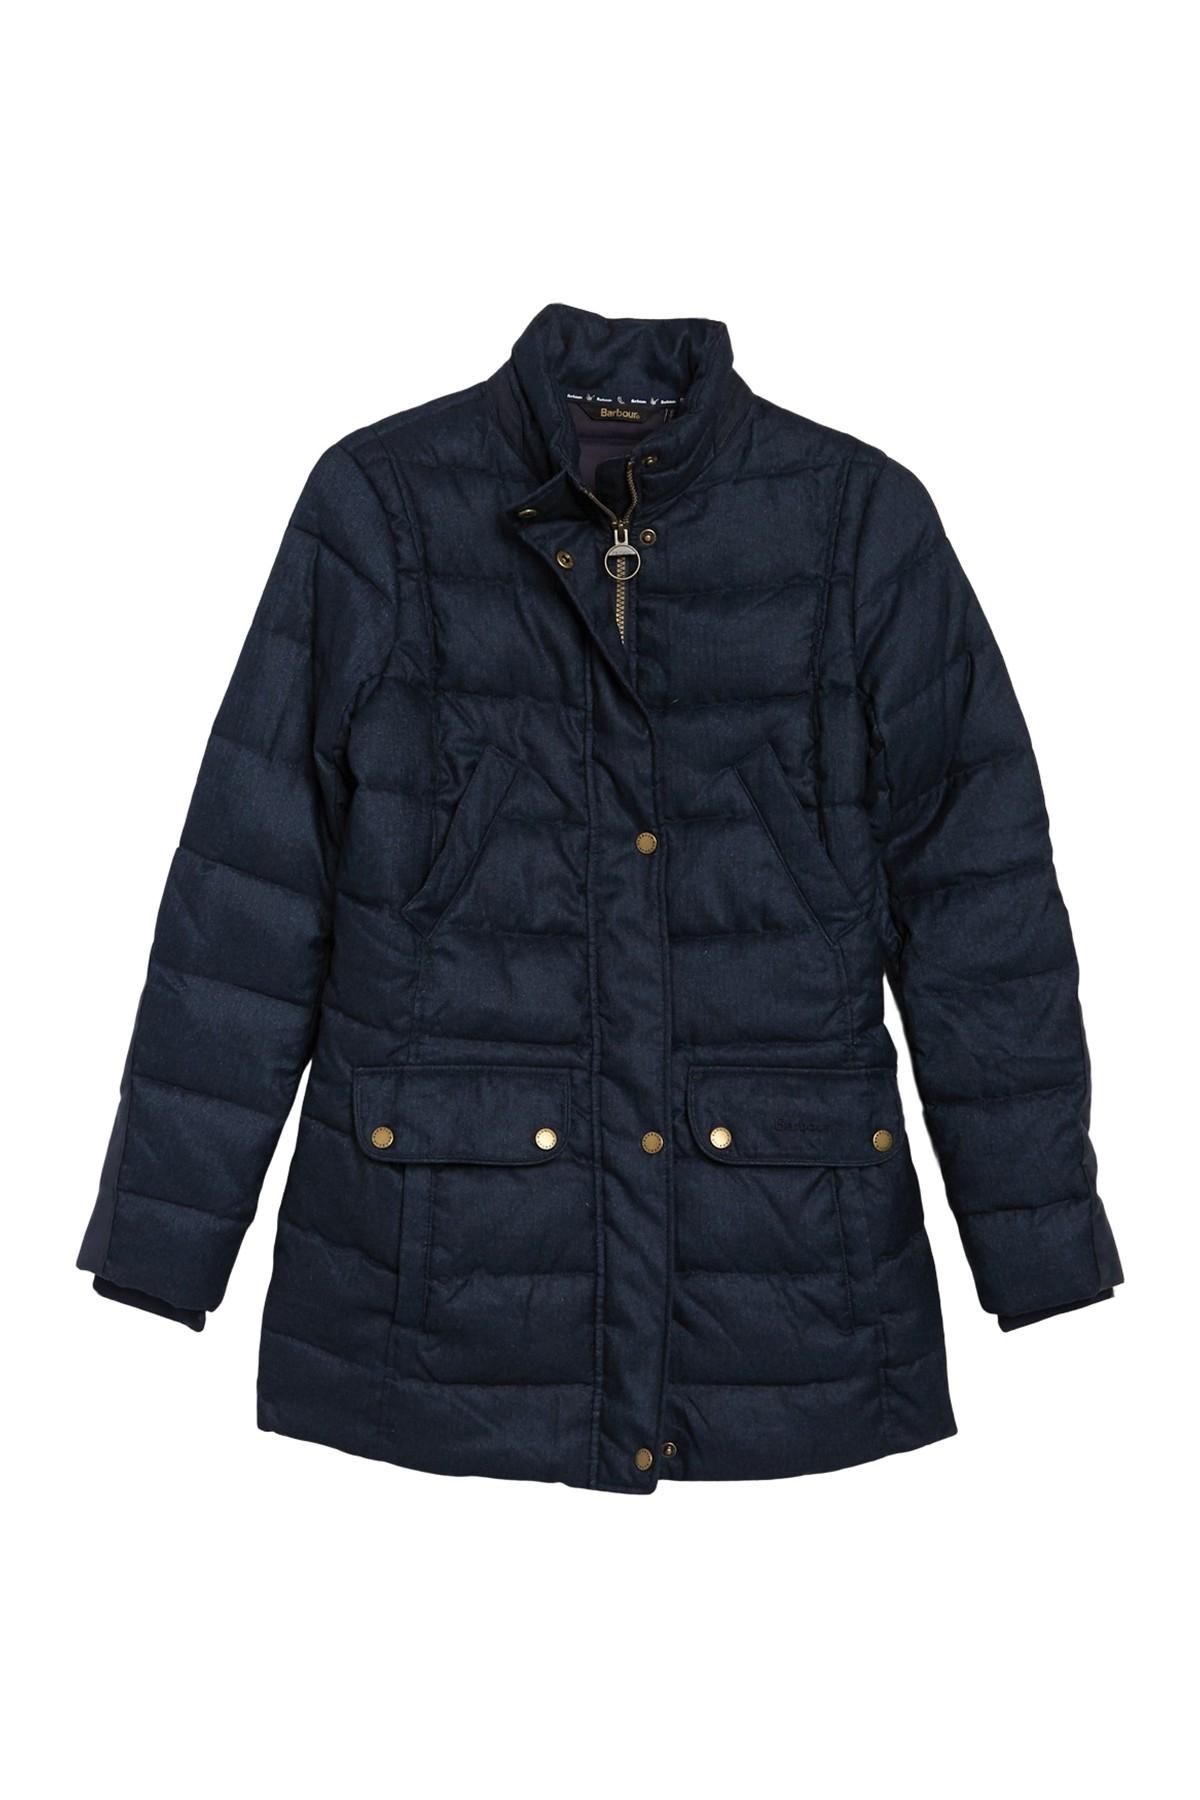 barbour goldfinch jacket